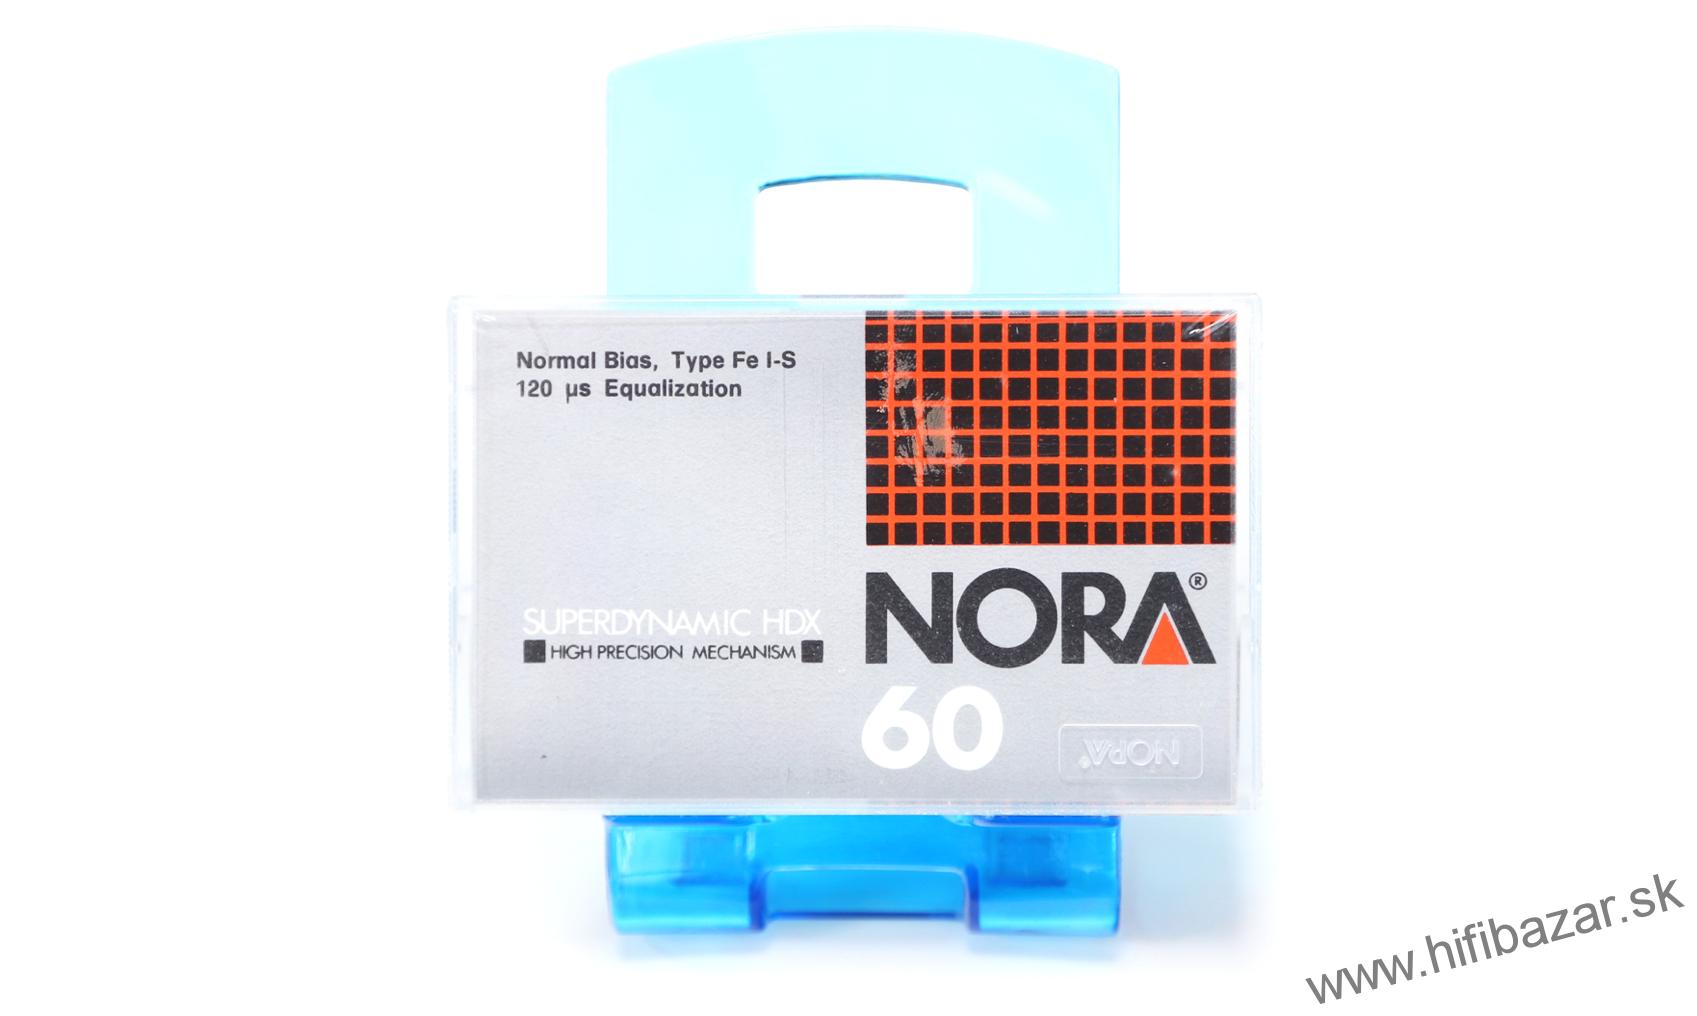 NORA HDX-60 Position Normal